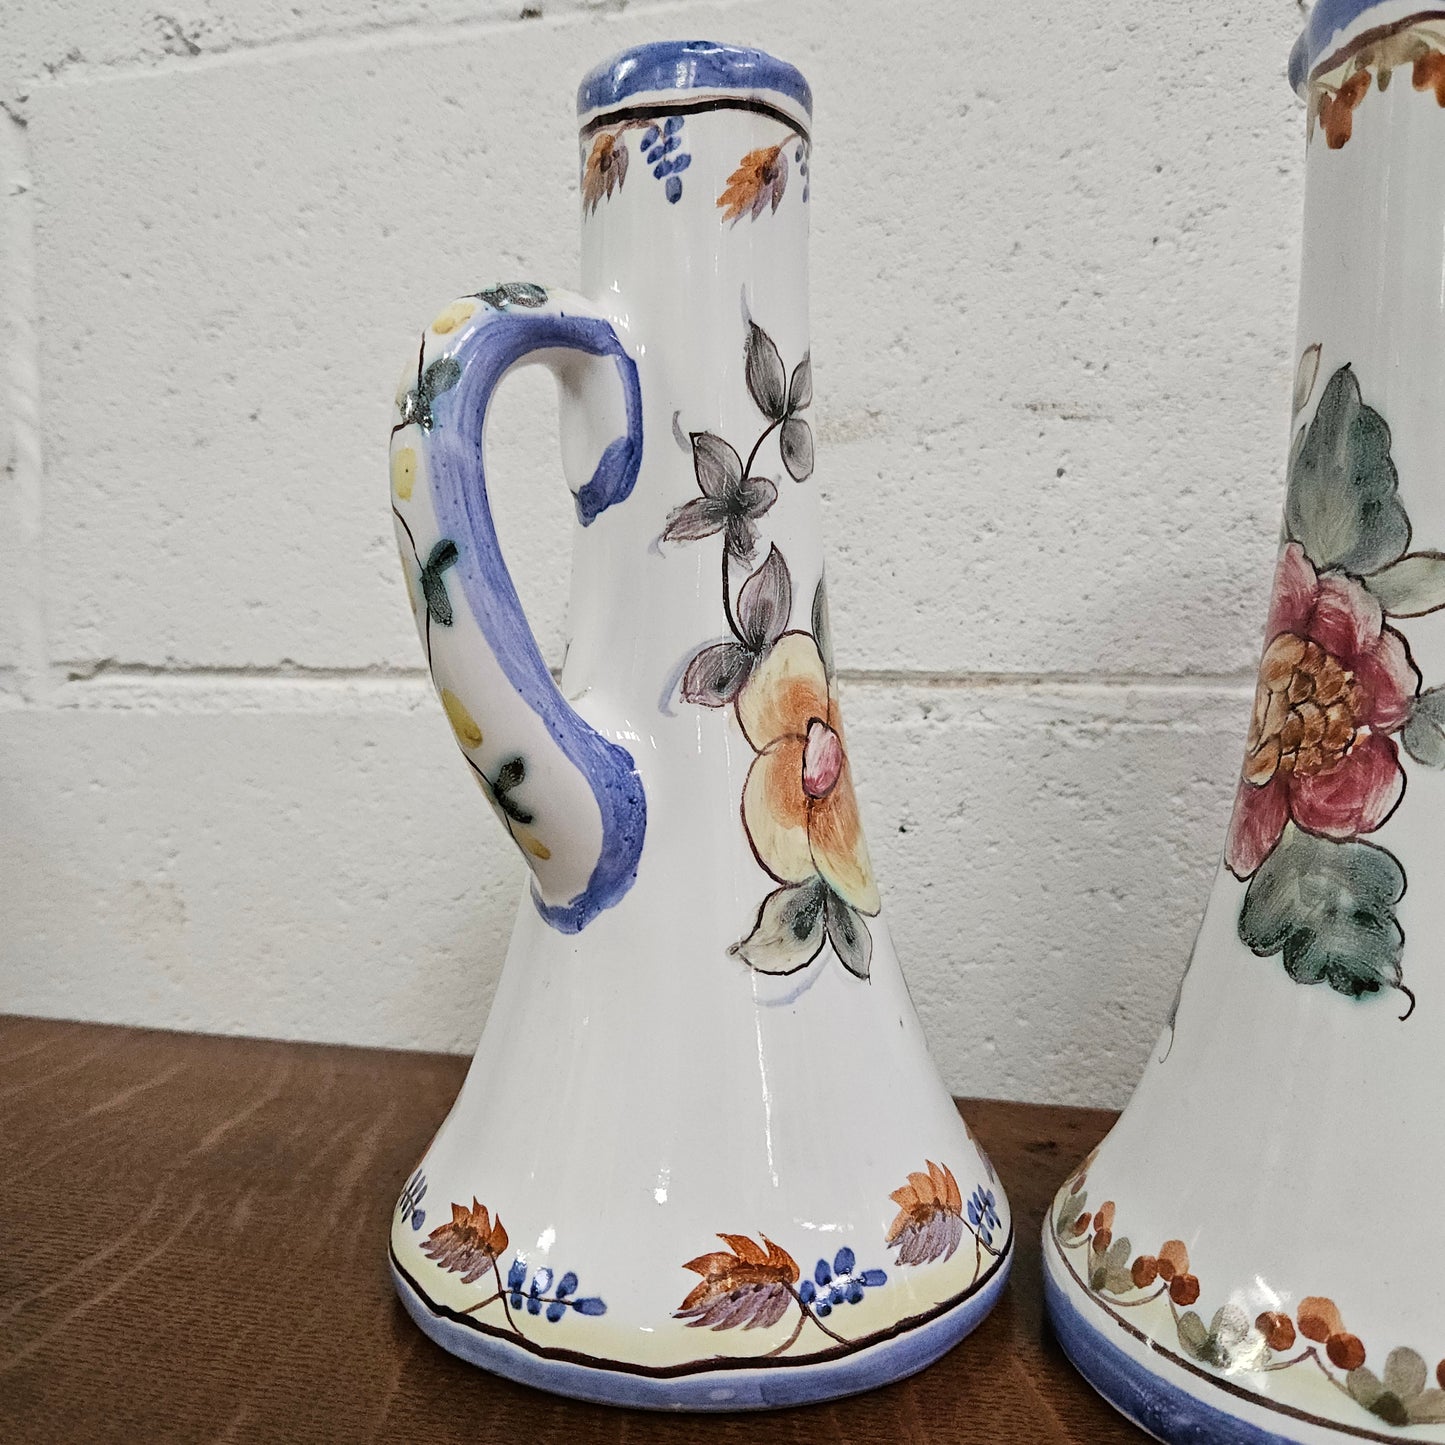 Pair of Hand Painted Portguese Pottery Coimbra Jug/Vases